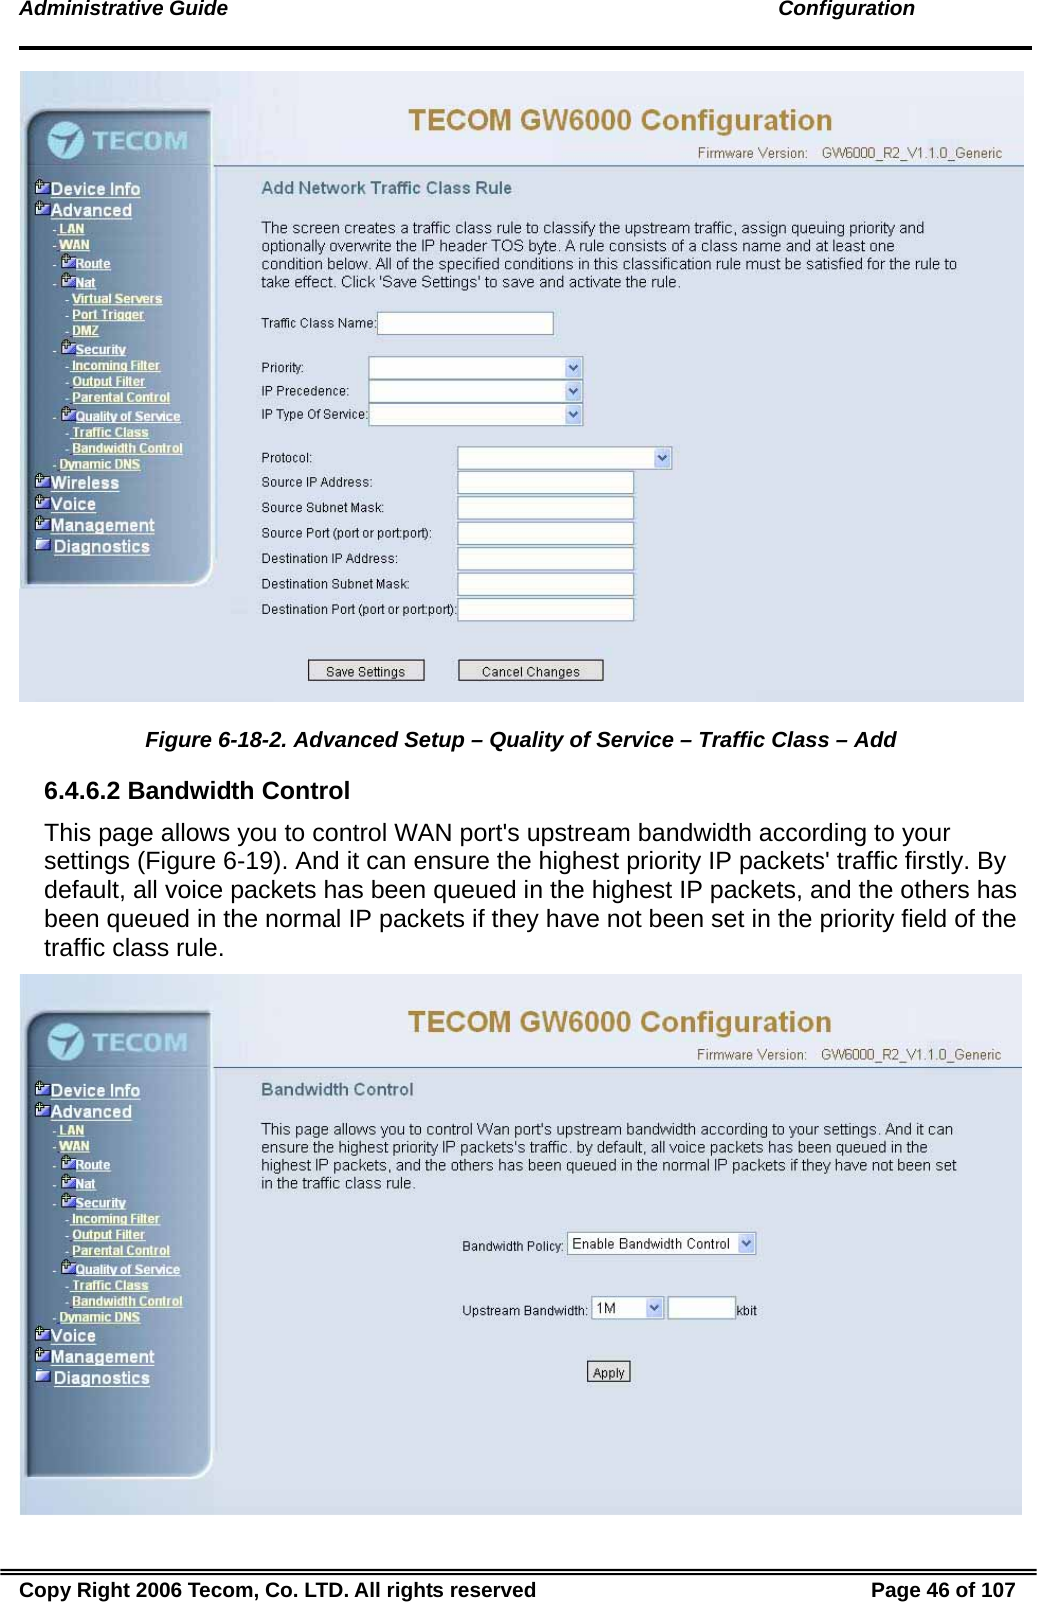 Administrative Guide                                                                                               Configuration   Figure 6-18-2. Advanced Setup – Quality of Service – Traffic Class – Add 6.4.6.2 Bandwidth Control This page allows you to control WAN port&apos;s upstream bandwidth according to your settings (Figure 6-19). And it can ensure the highest priority IP packets&apos; traffic firstly. By default, all voice packets has been queued in the highest IP packets, and the others has been queued in the normal IP packets if they have not been set in the priority field of the traffic class rule.  Copy Right 2006 Tecom, Co. LTD. All rights reserved  Page 46 of 107 